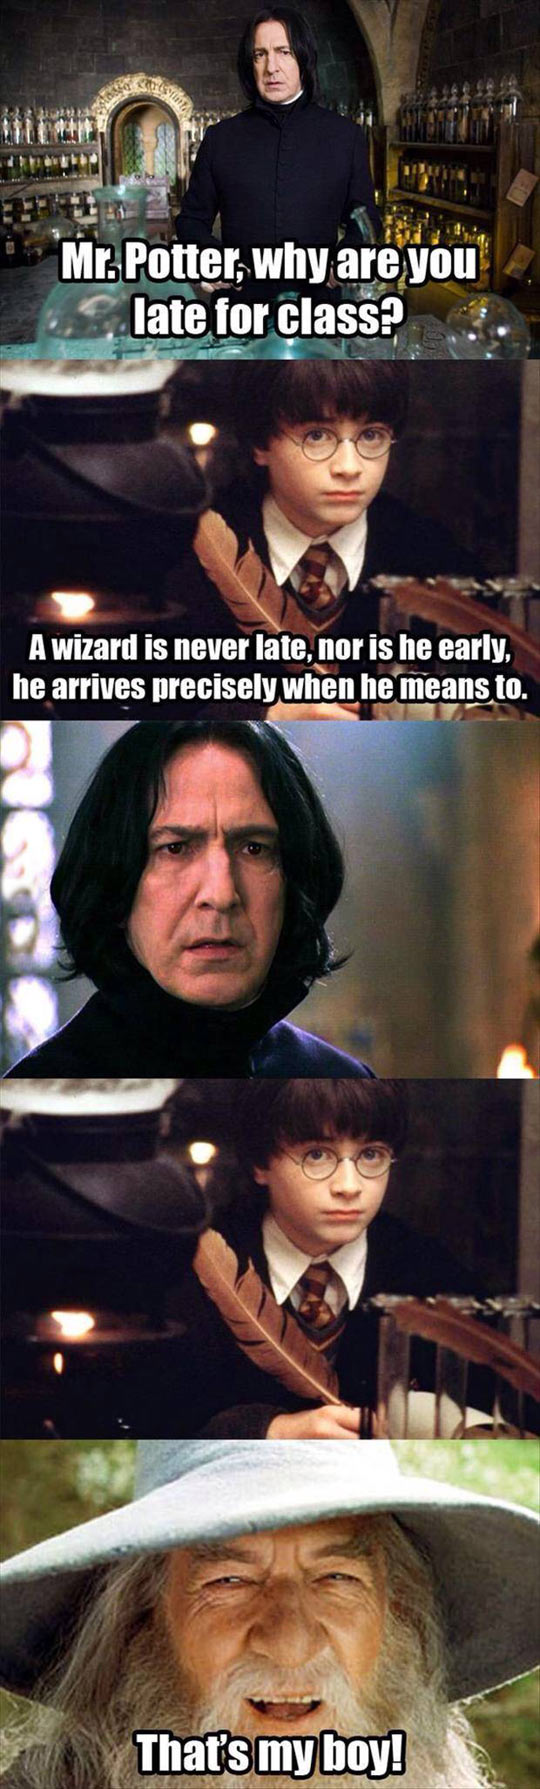 Wizards Have Always Perfect Timing